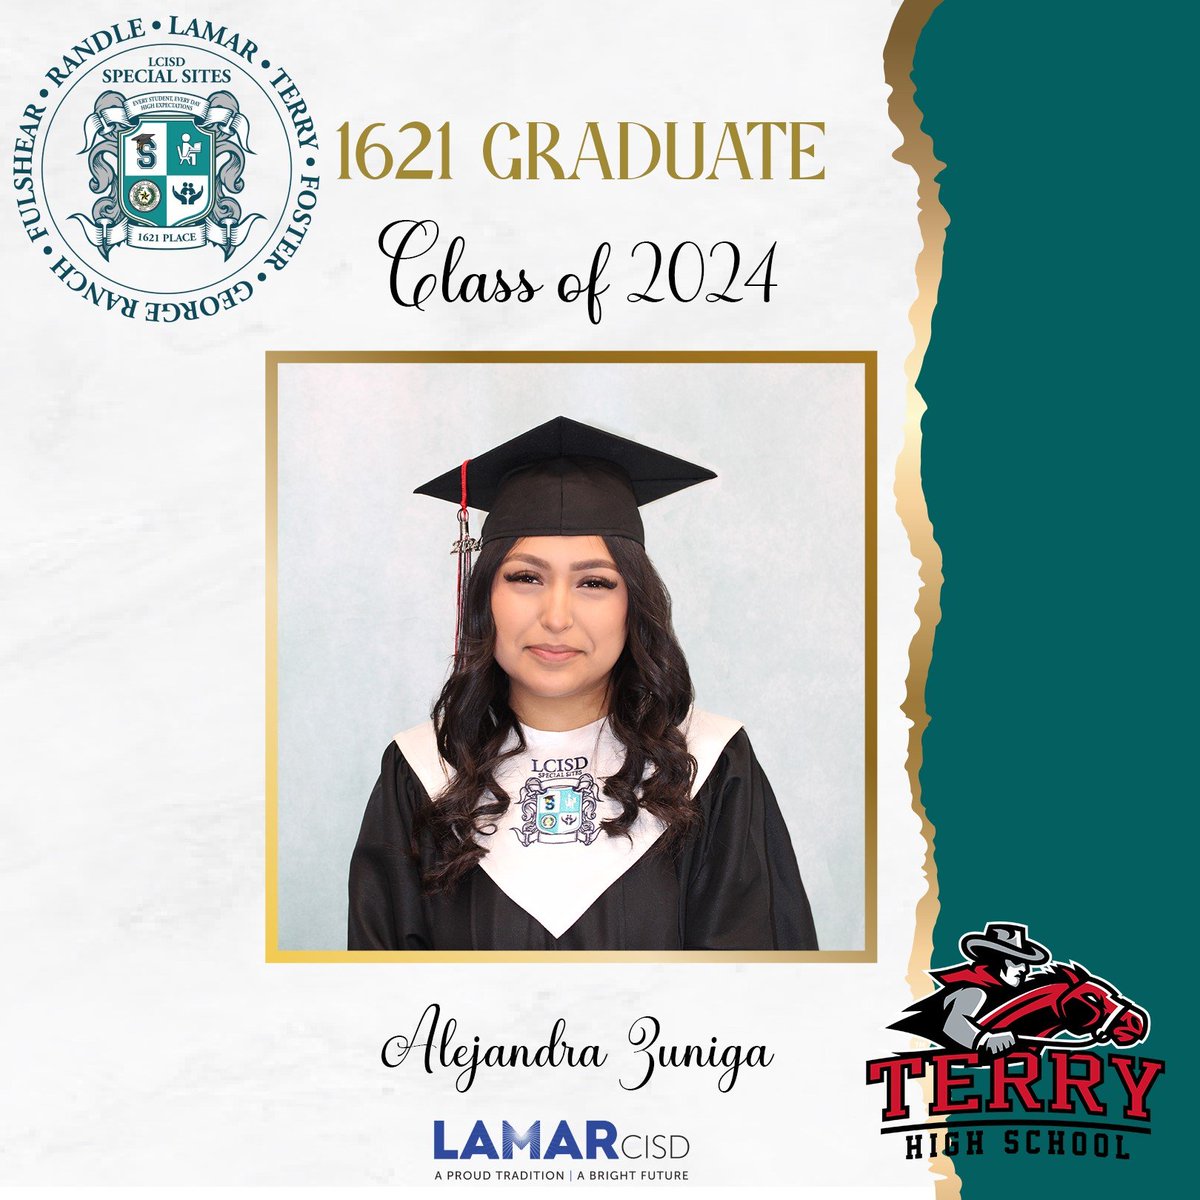 🎓Special Sites proudly congratulates Alejandra Zuniga on being a confirmed graduate of Terry High School! Your hard work & determination at 1621 Place, LCISD’s ONLY School of Choice, have paid off, making you an official LCISD Graduate! Best wishes! #1621Place @Terry_Rangers